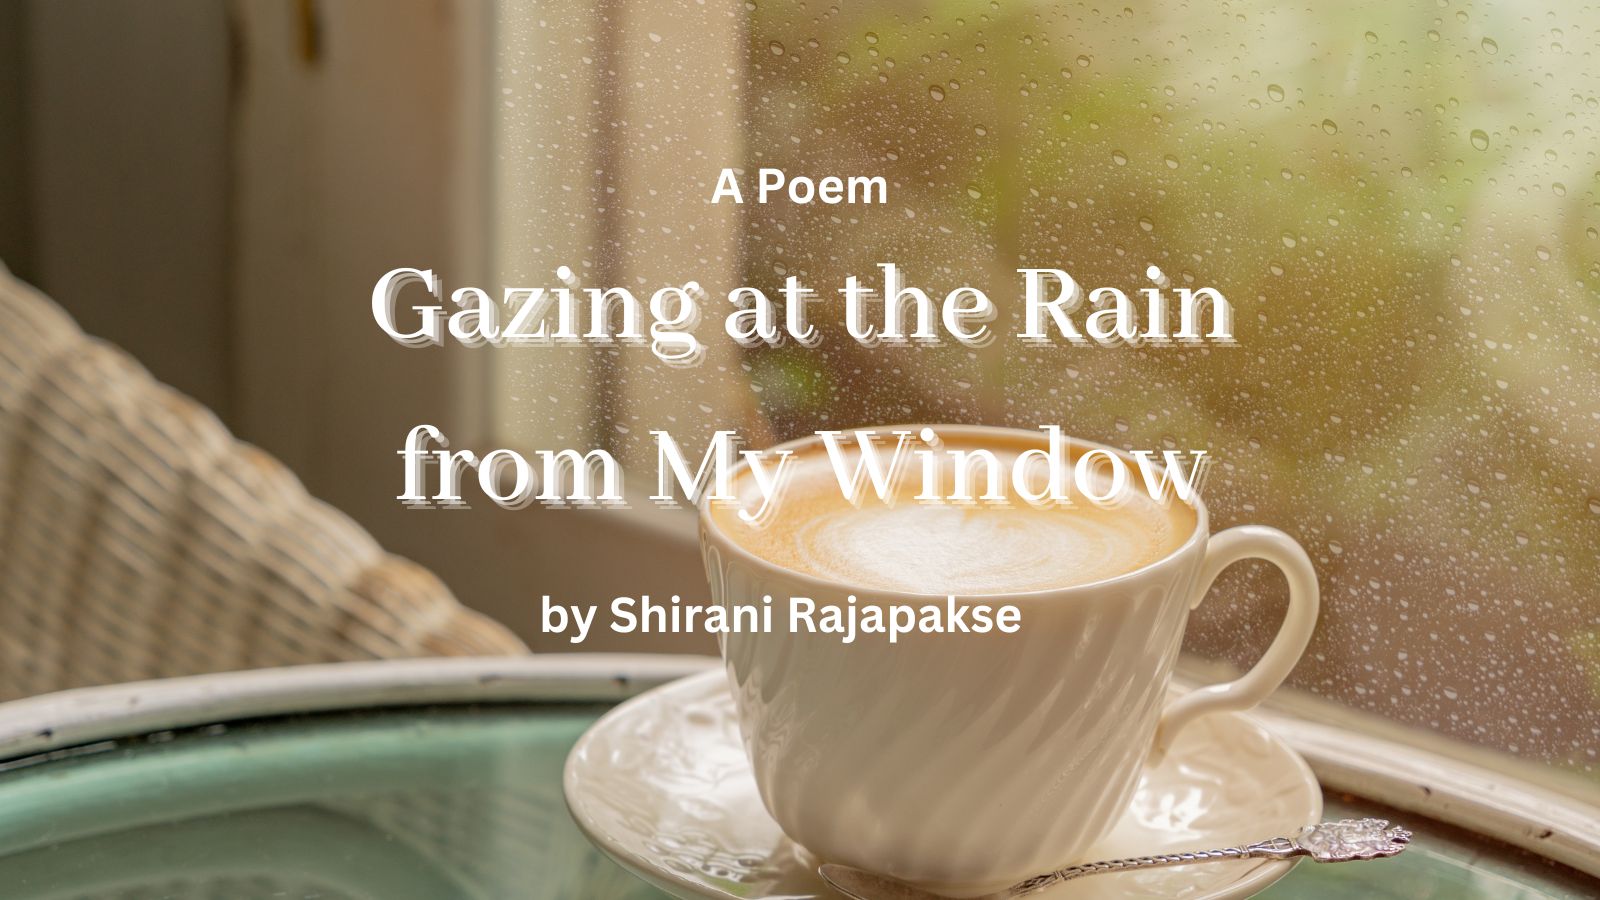 Gazing at the Rain from My Window by Shirani Rajapakse